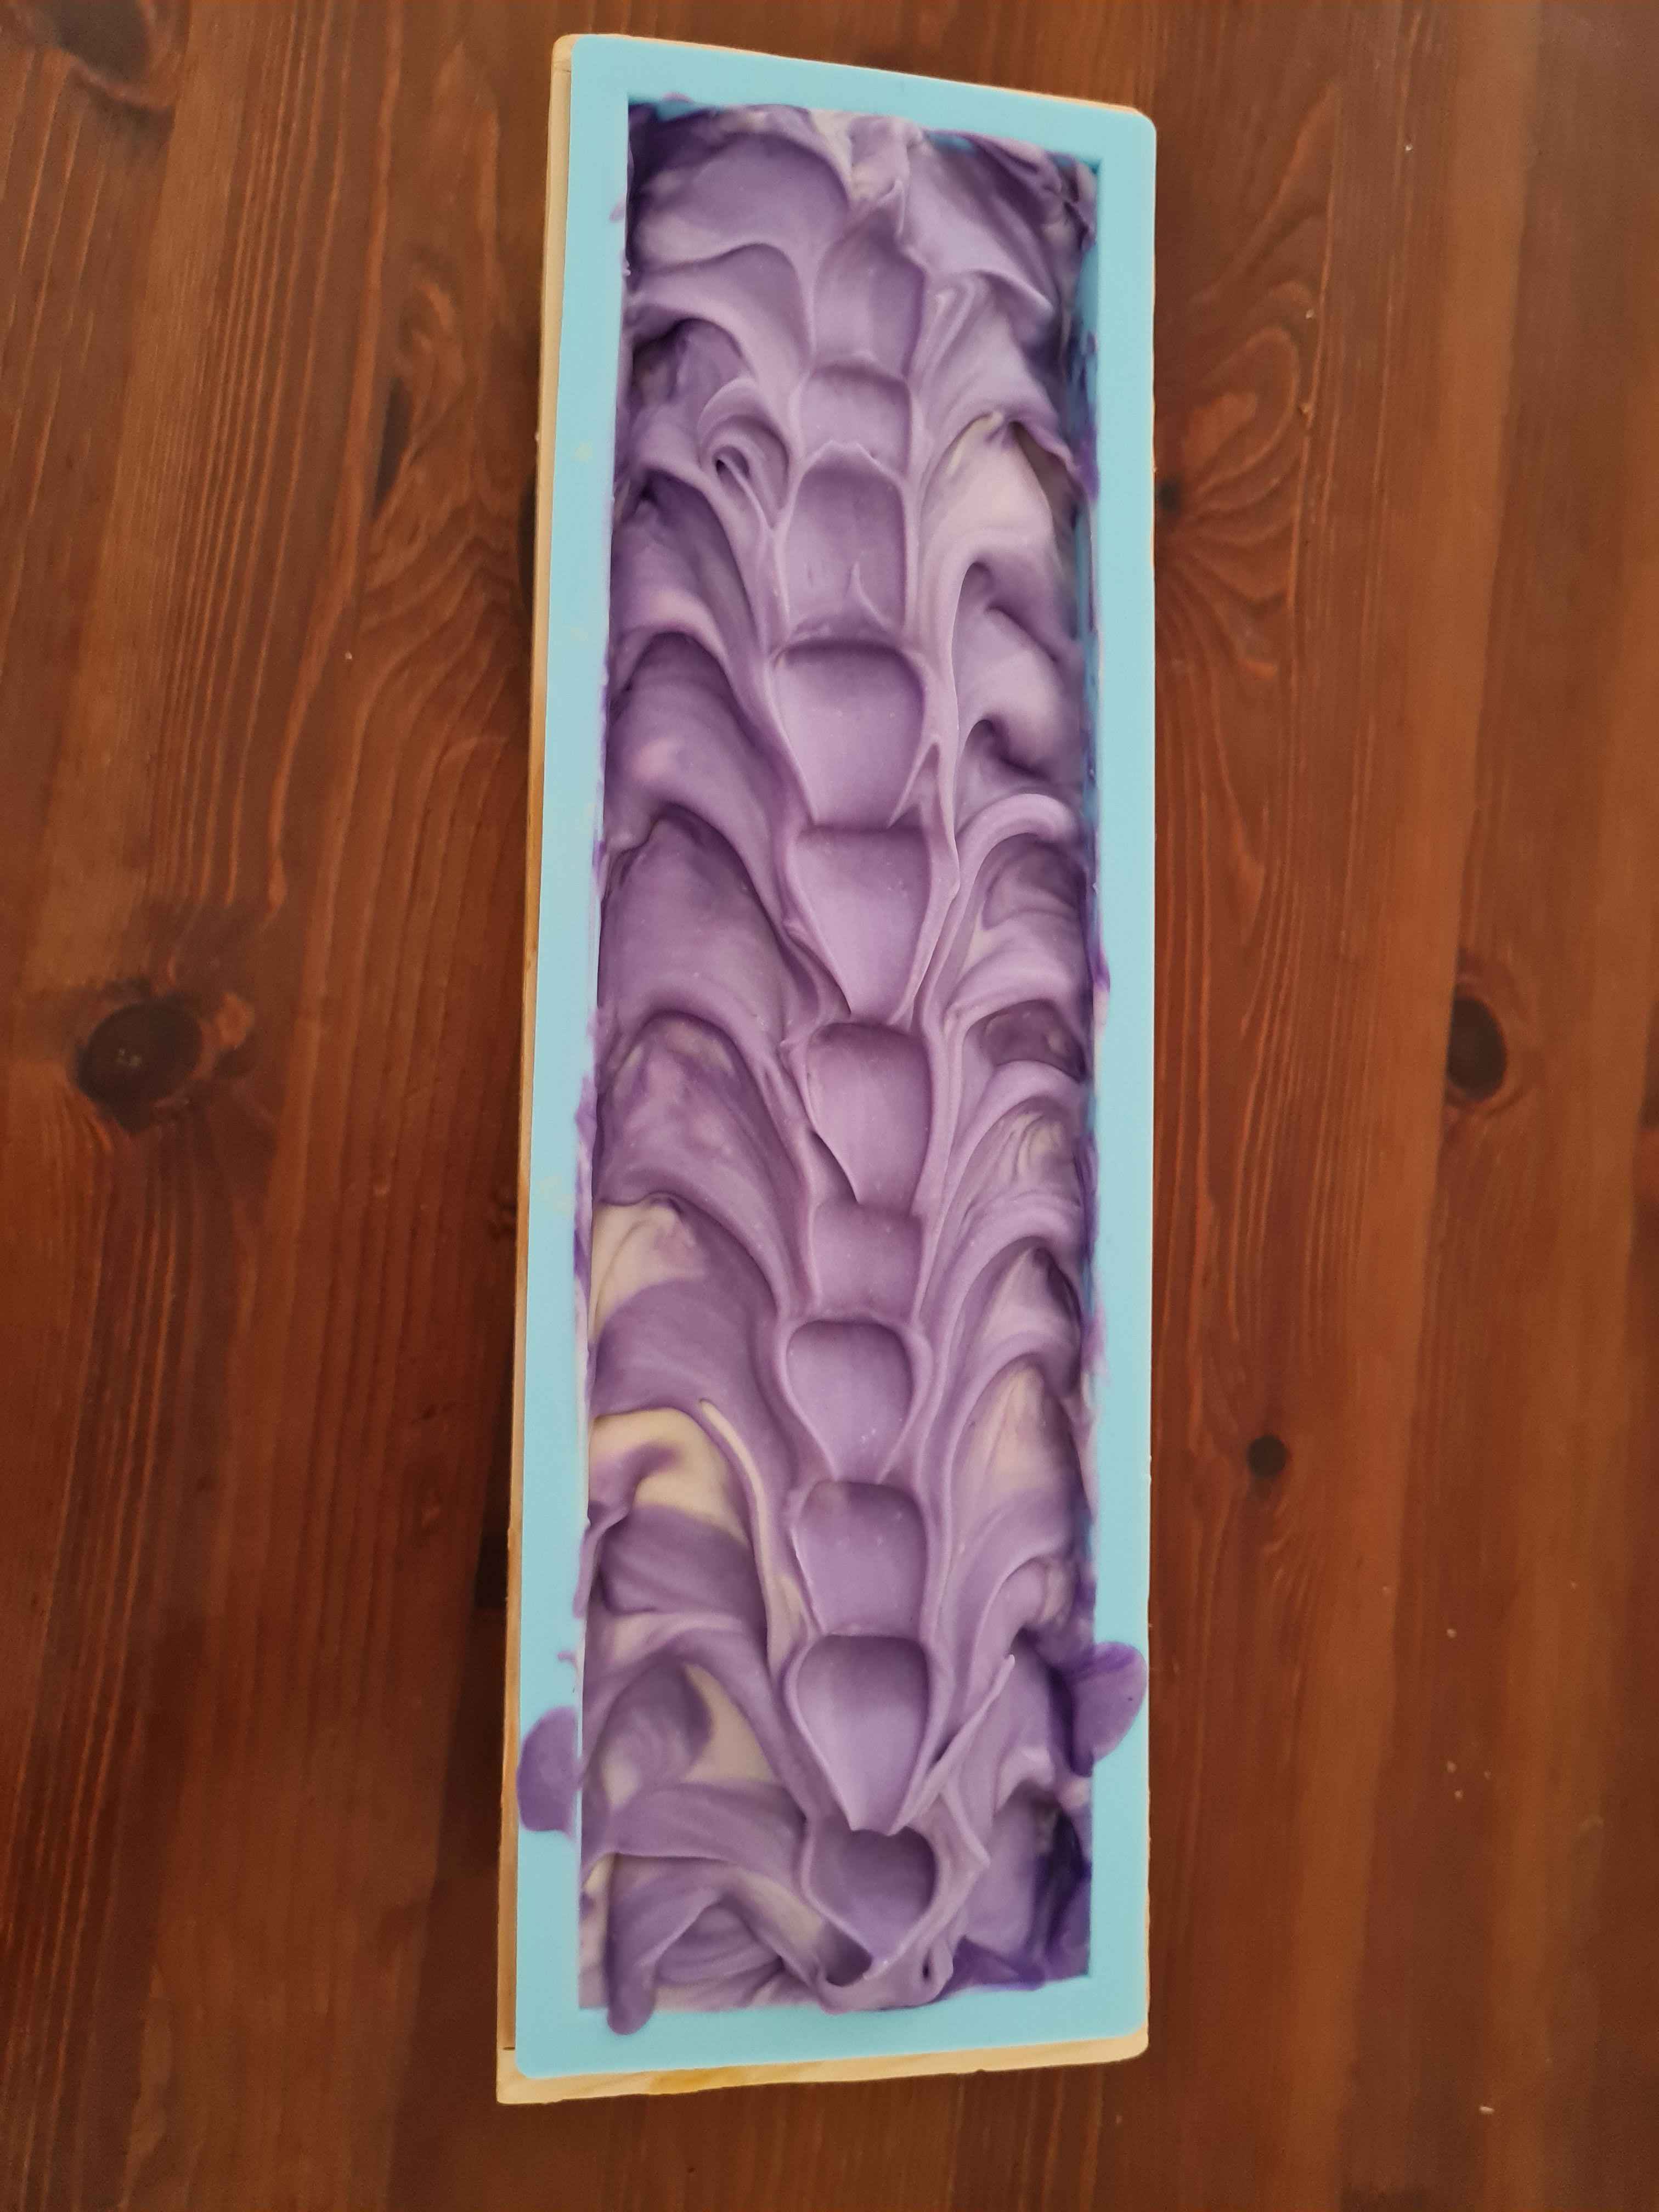 Goat's milk soap with Lavender essential oil and Beeswax 